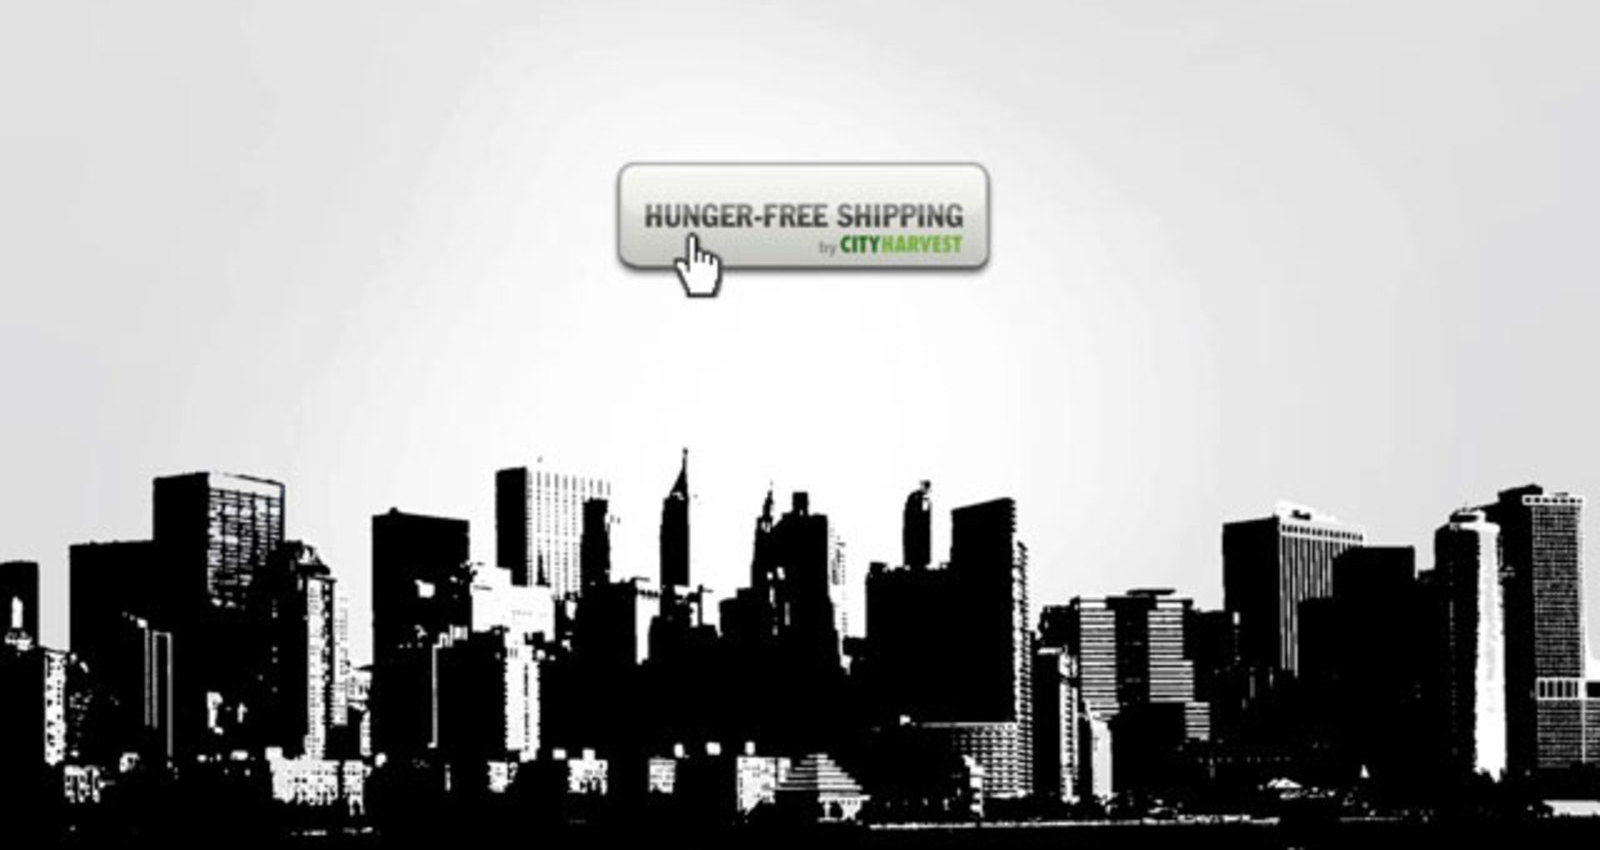 Hunger-Free Shipping